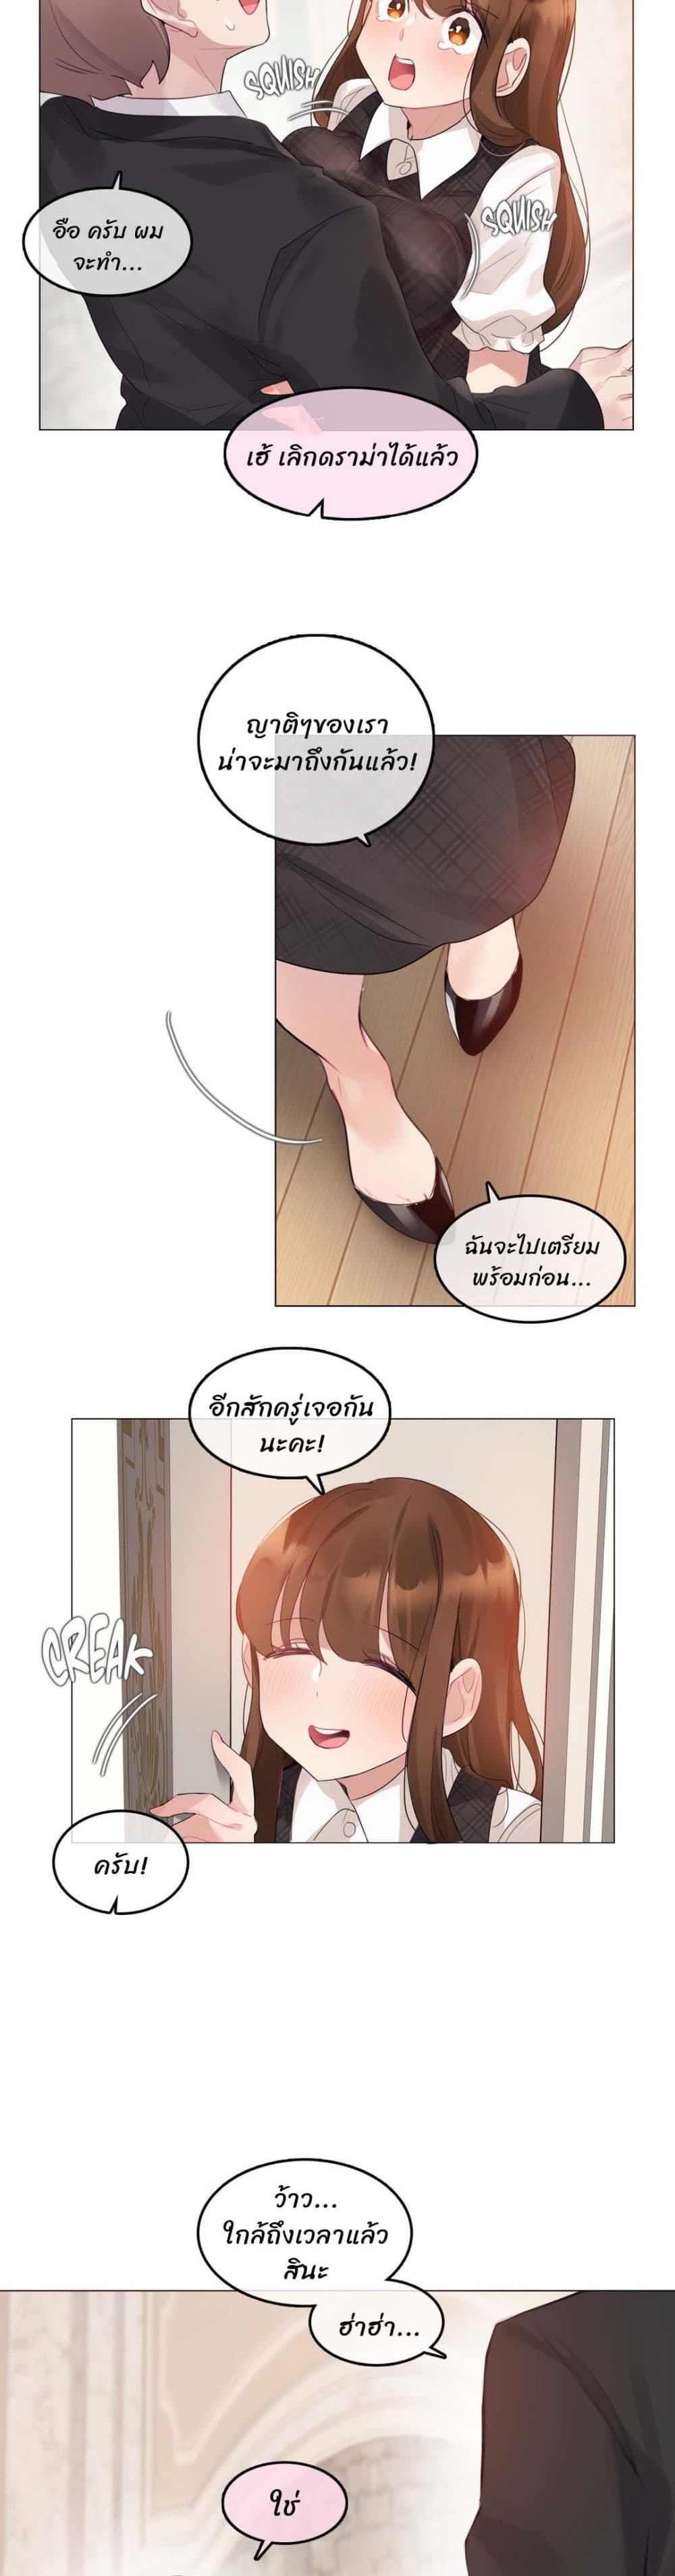 A Pervert's Daily Life 112-112